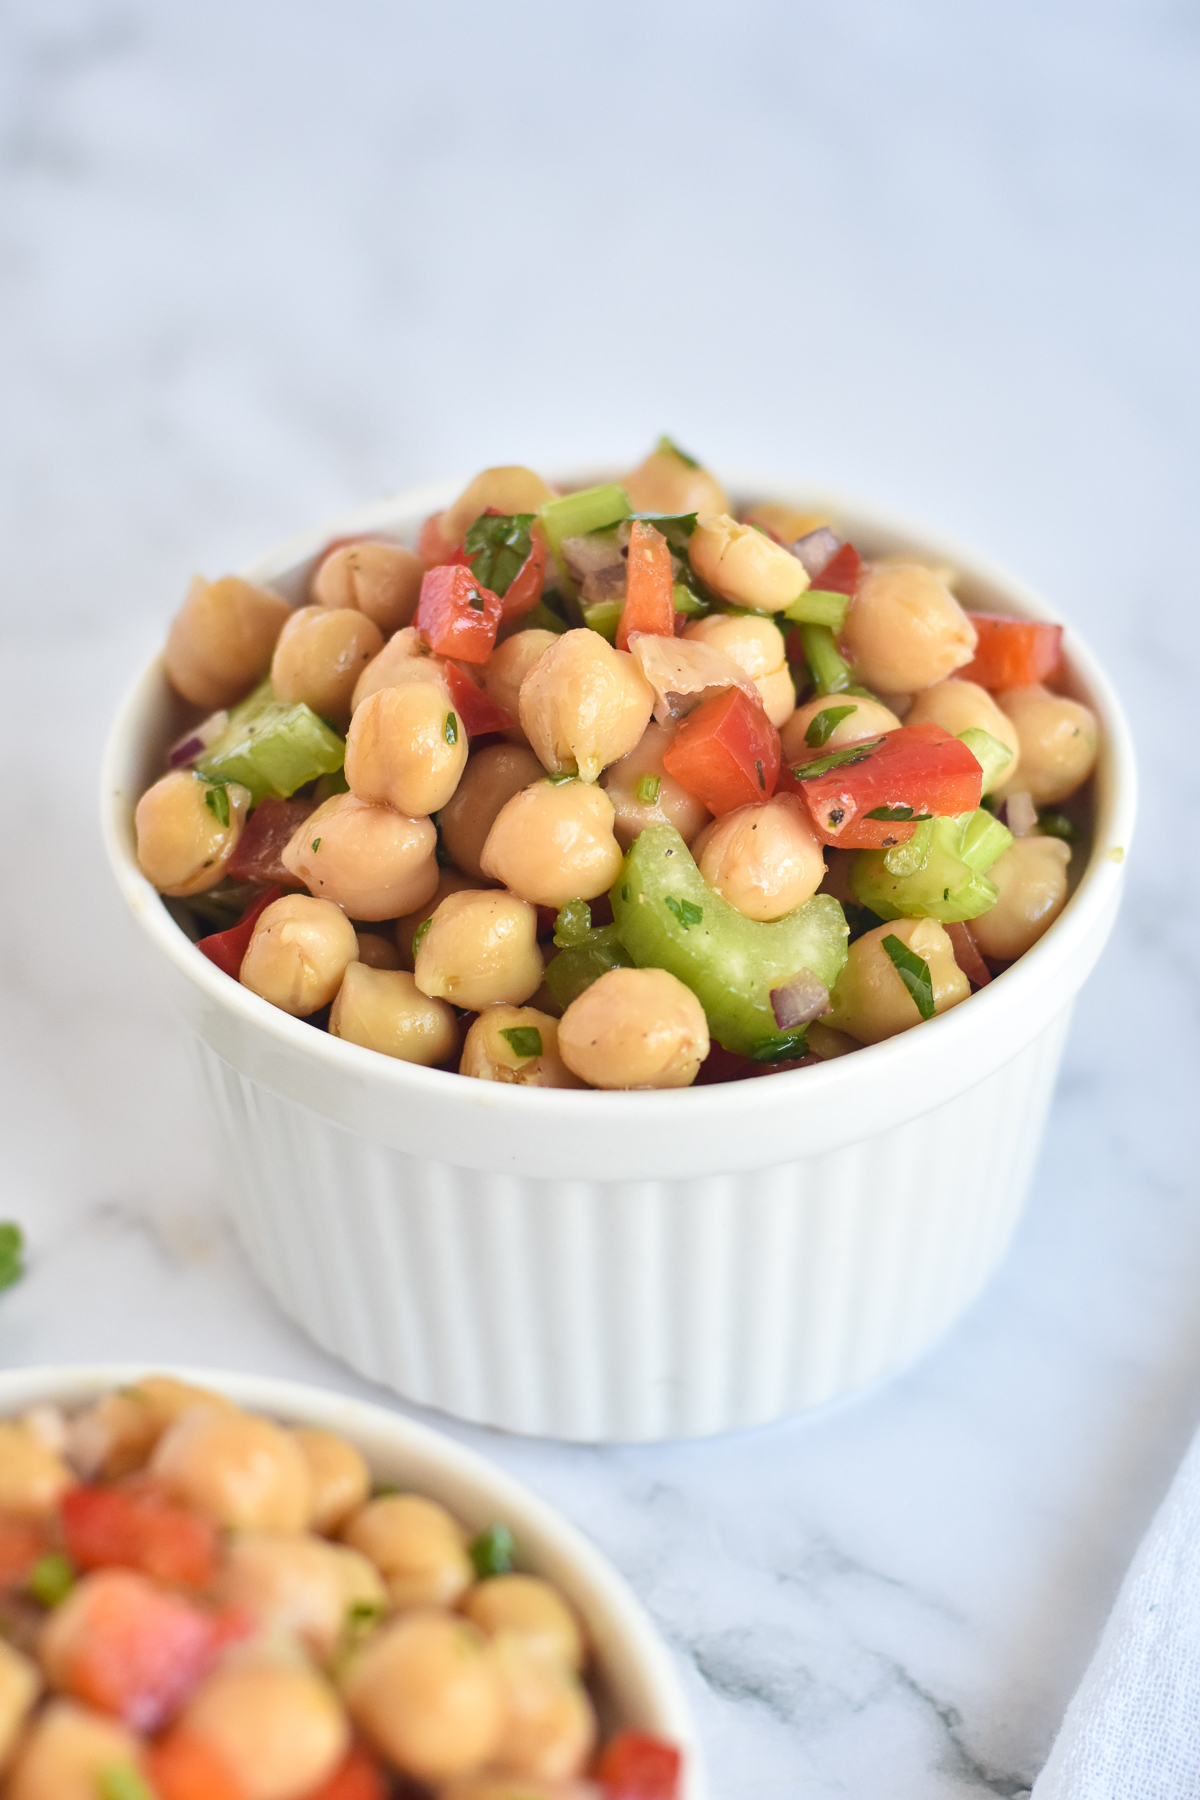 Healthy, chickpea salad that just takes a few minutes to make.